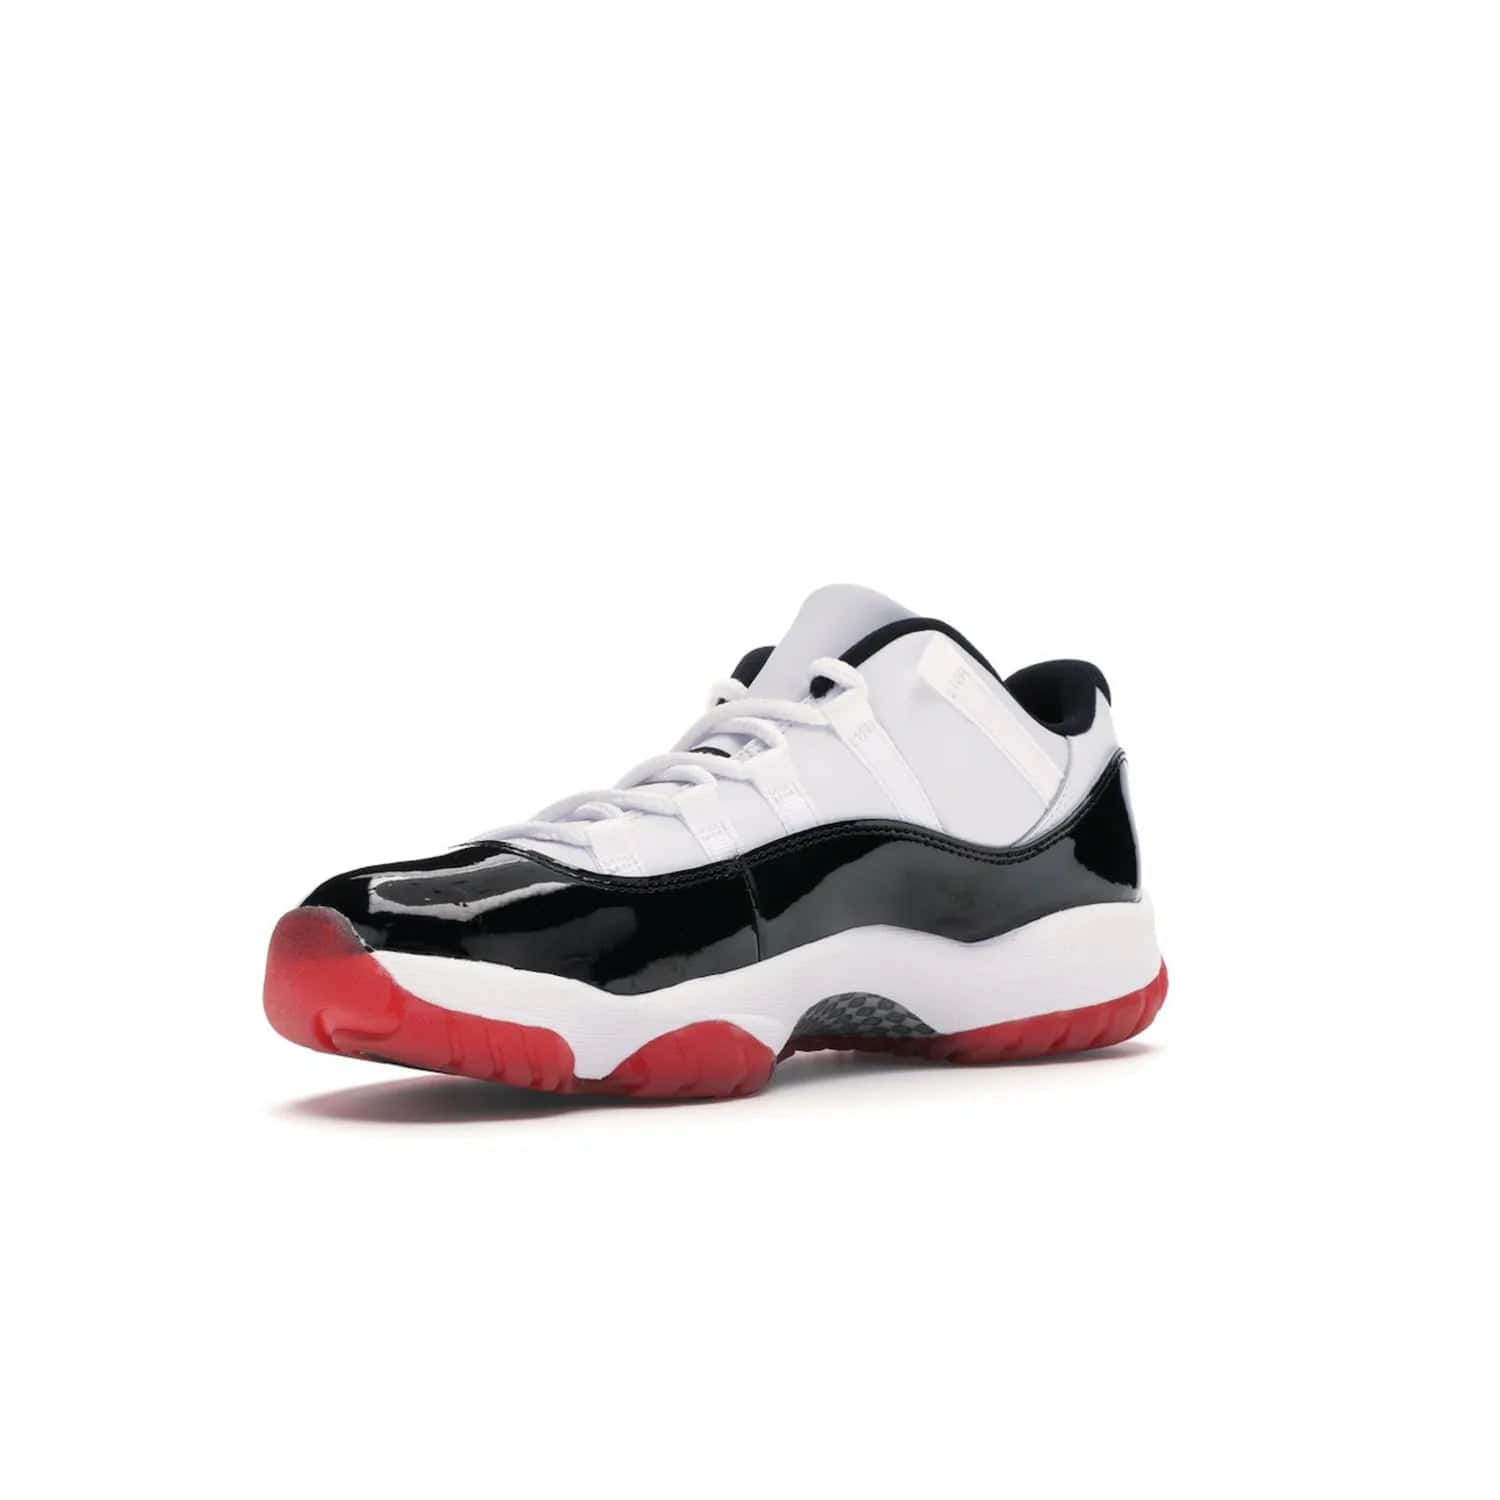 Jordan 11 Retro Low Concord Bred - Image 15 - Only at www.BallersClubKickz.com - Grab the classic Jordan 11 look with the Jordan 11 Retro Low Concord Bred. With white and black elements and the iconic red outsole of the Jordan 11 Bred, you won't miss a beat. Released in June 2020, the perfect complement to any outfit.